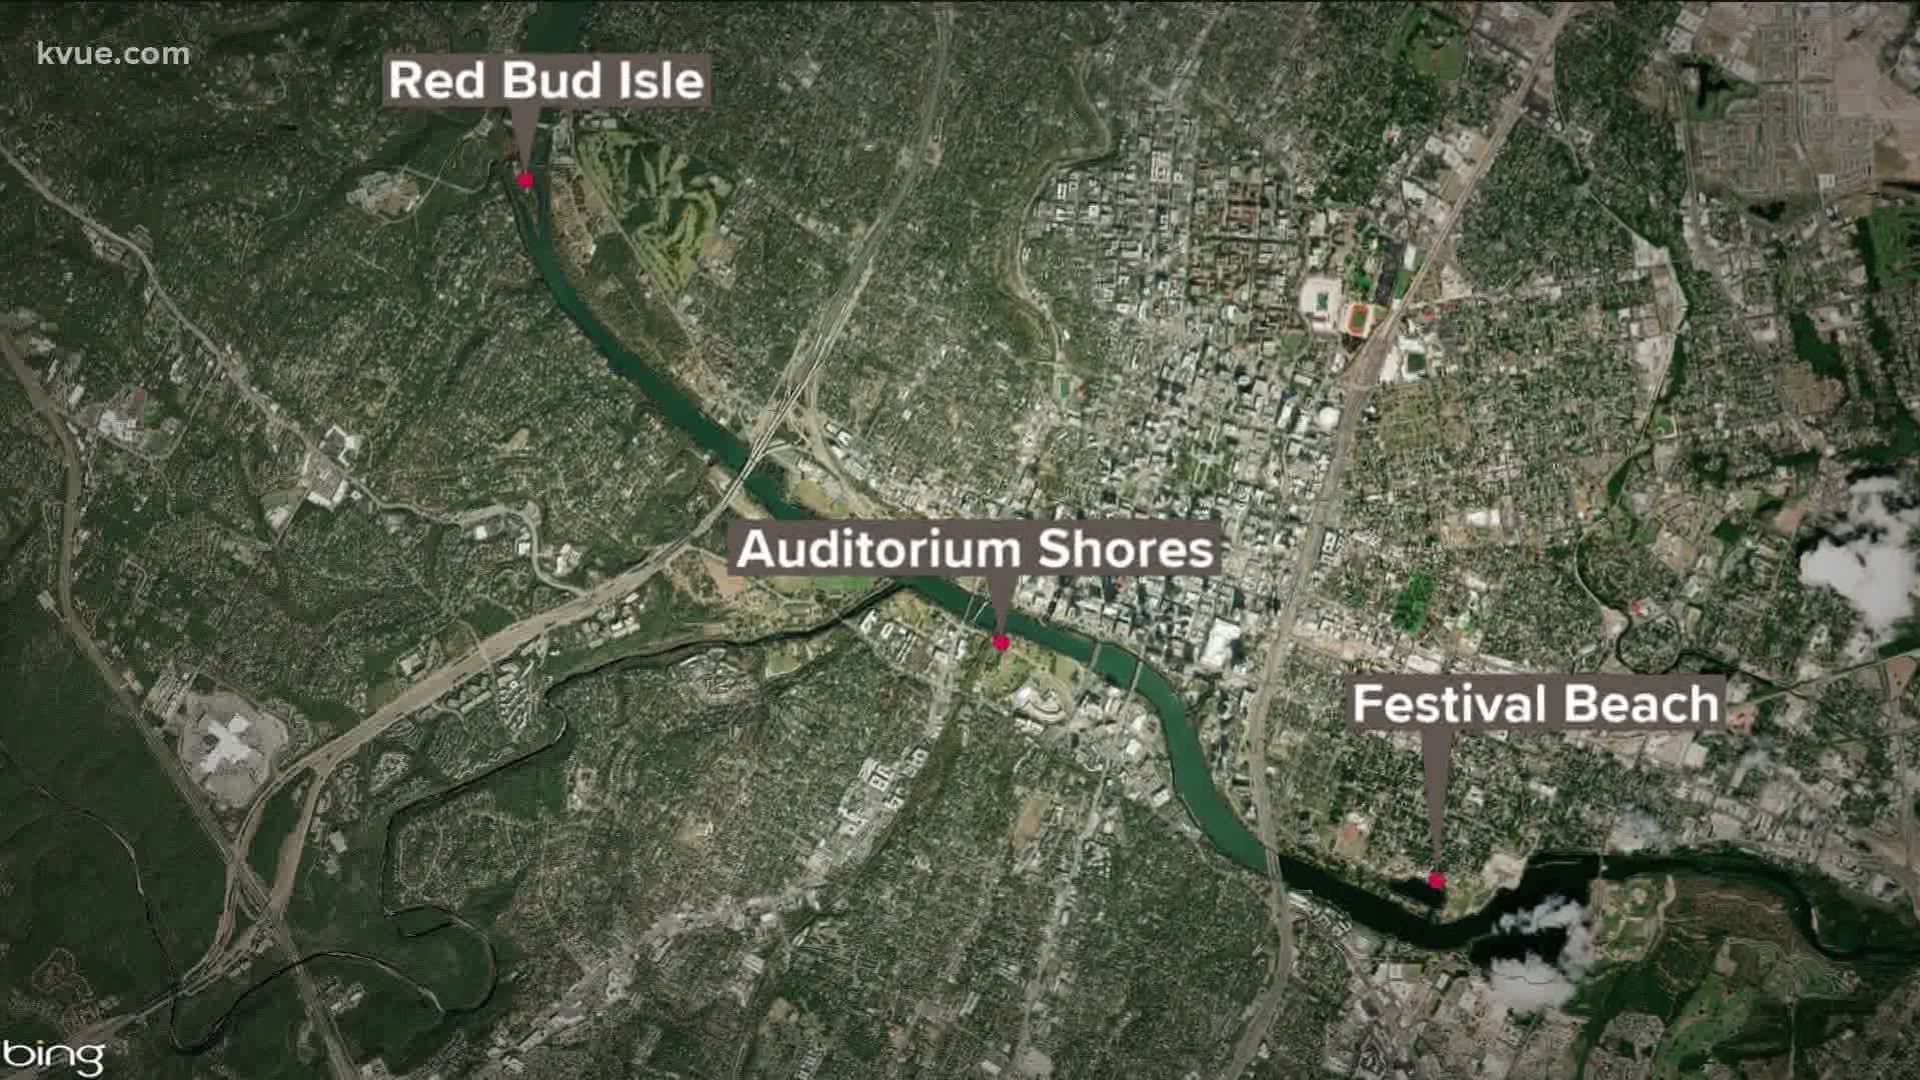 The algae has been found at Auditorium Shores, Festival Beach and Red Bud Isle.